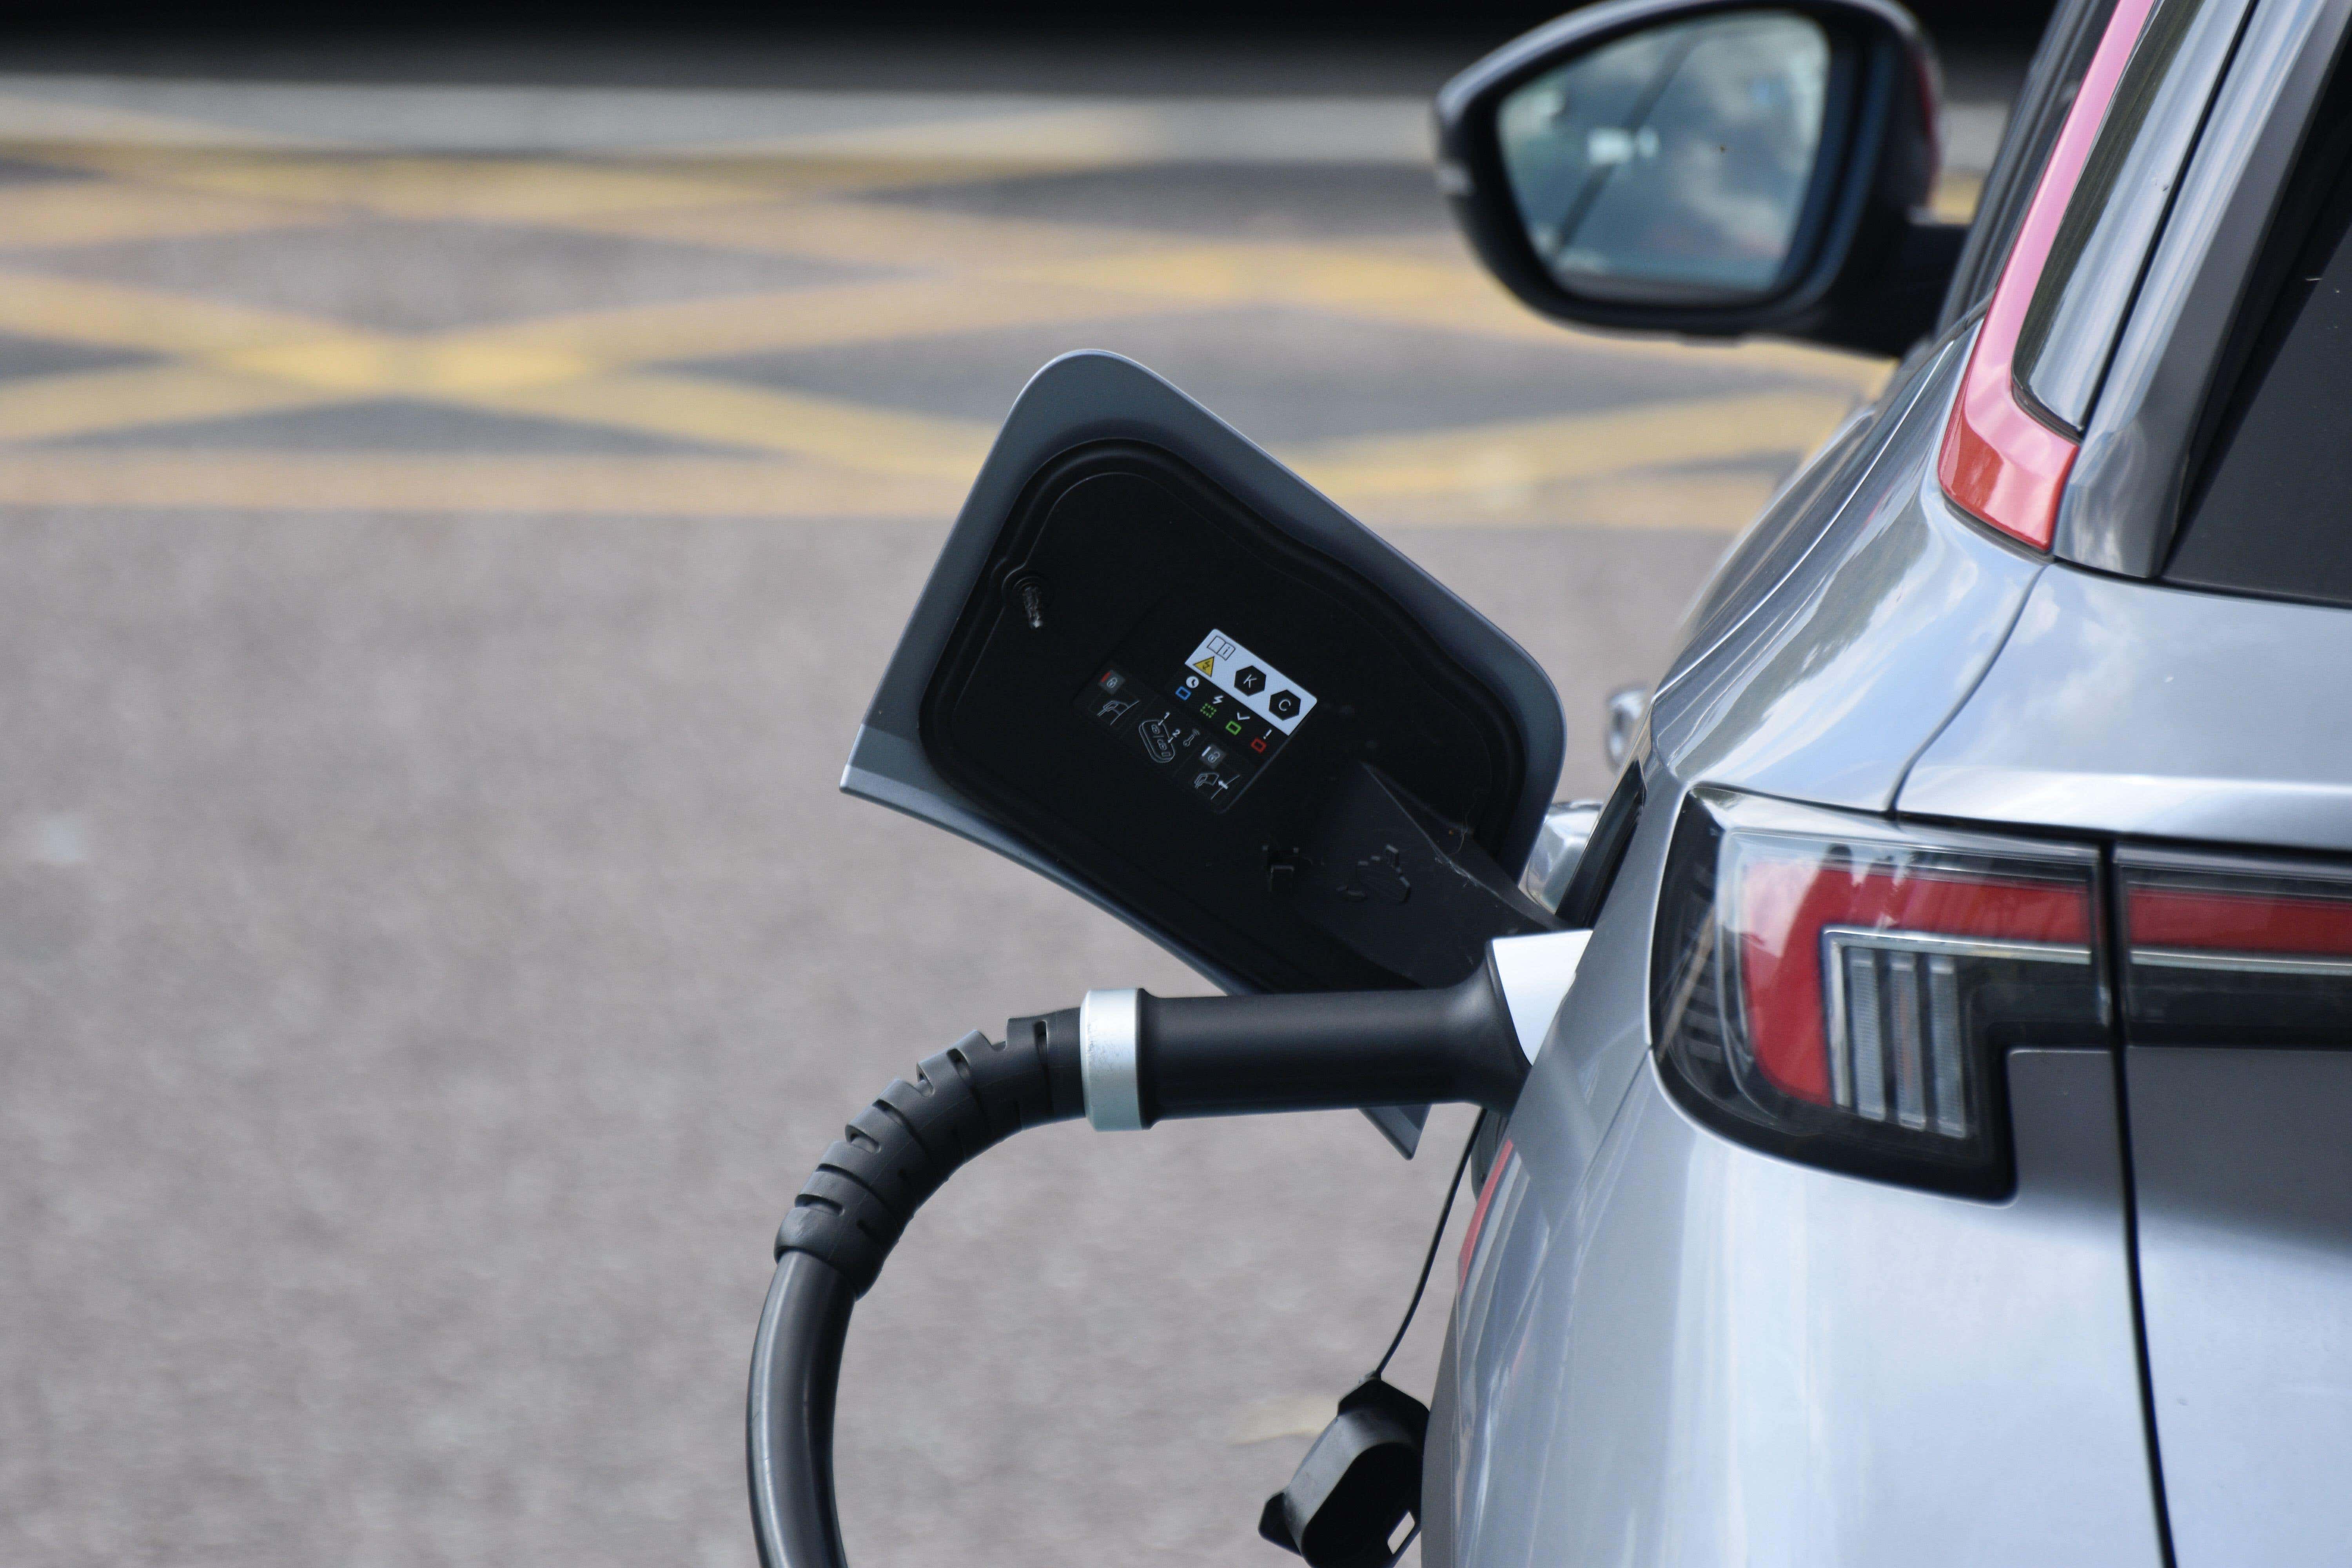 The vast majority of Type-2 public chargers require drivers to access them via mobile phone apps